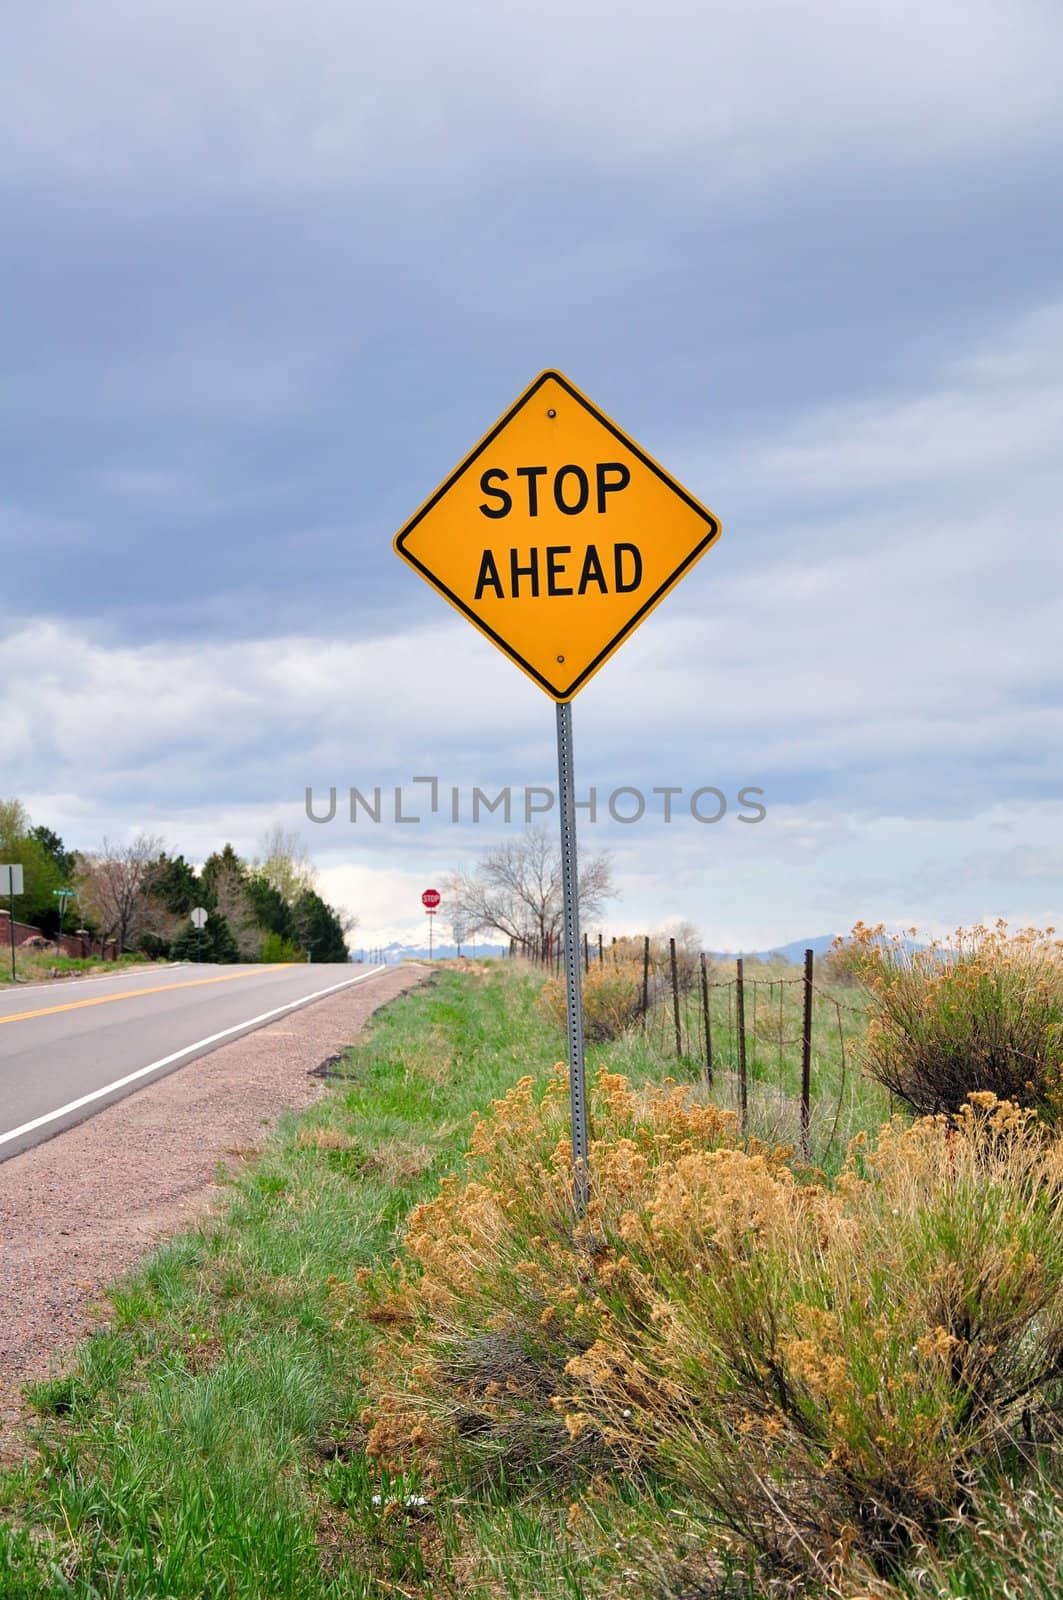 A traffic sign stands along a street in rural America.